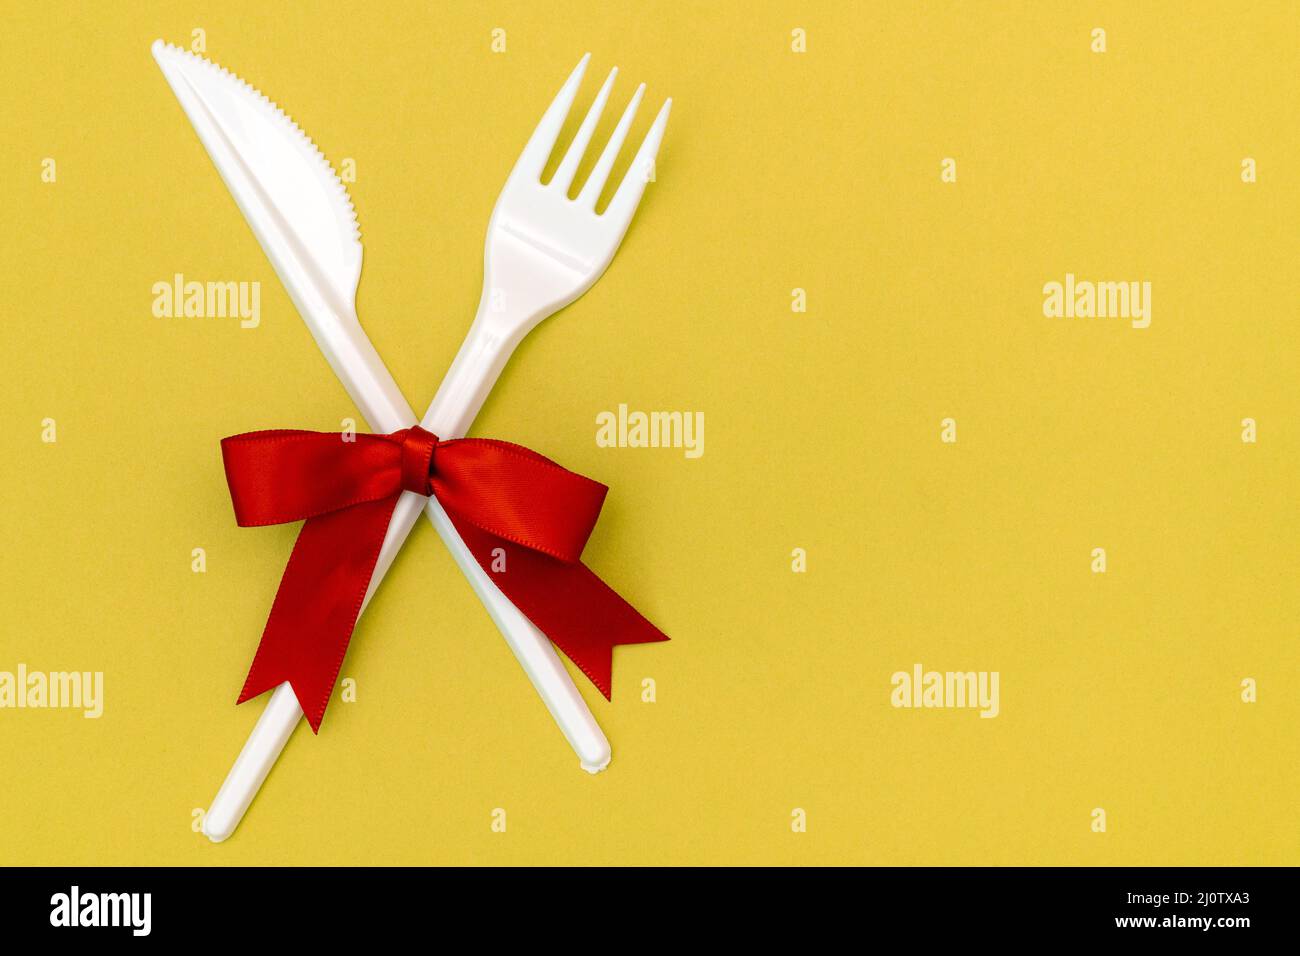 Disposable fork and knife decorated with red bow Stock Photo